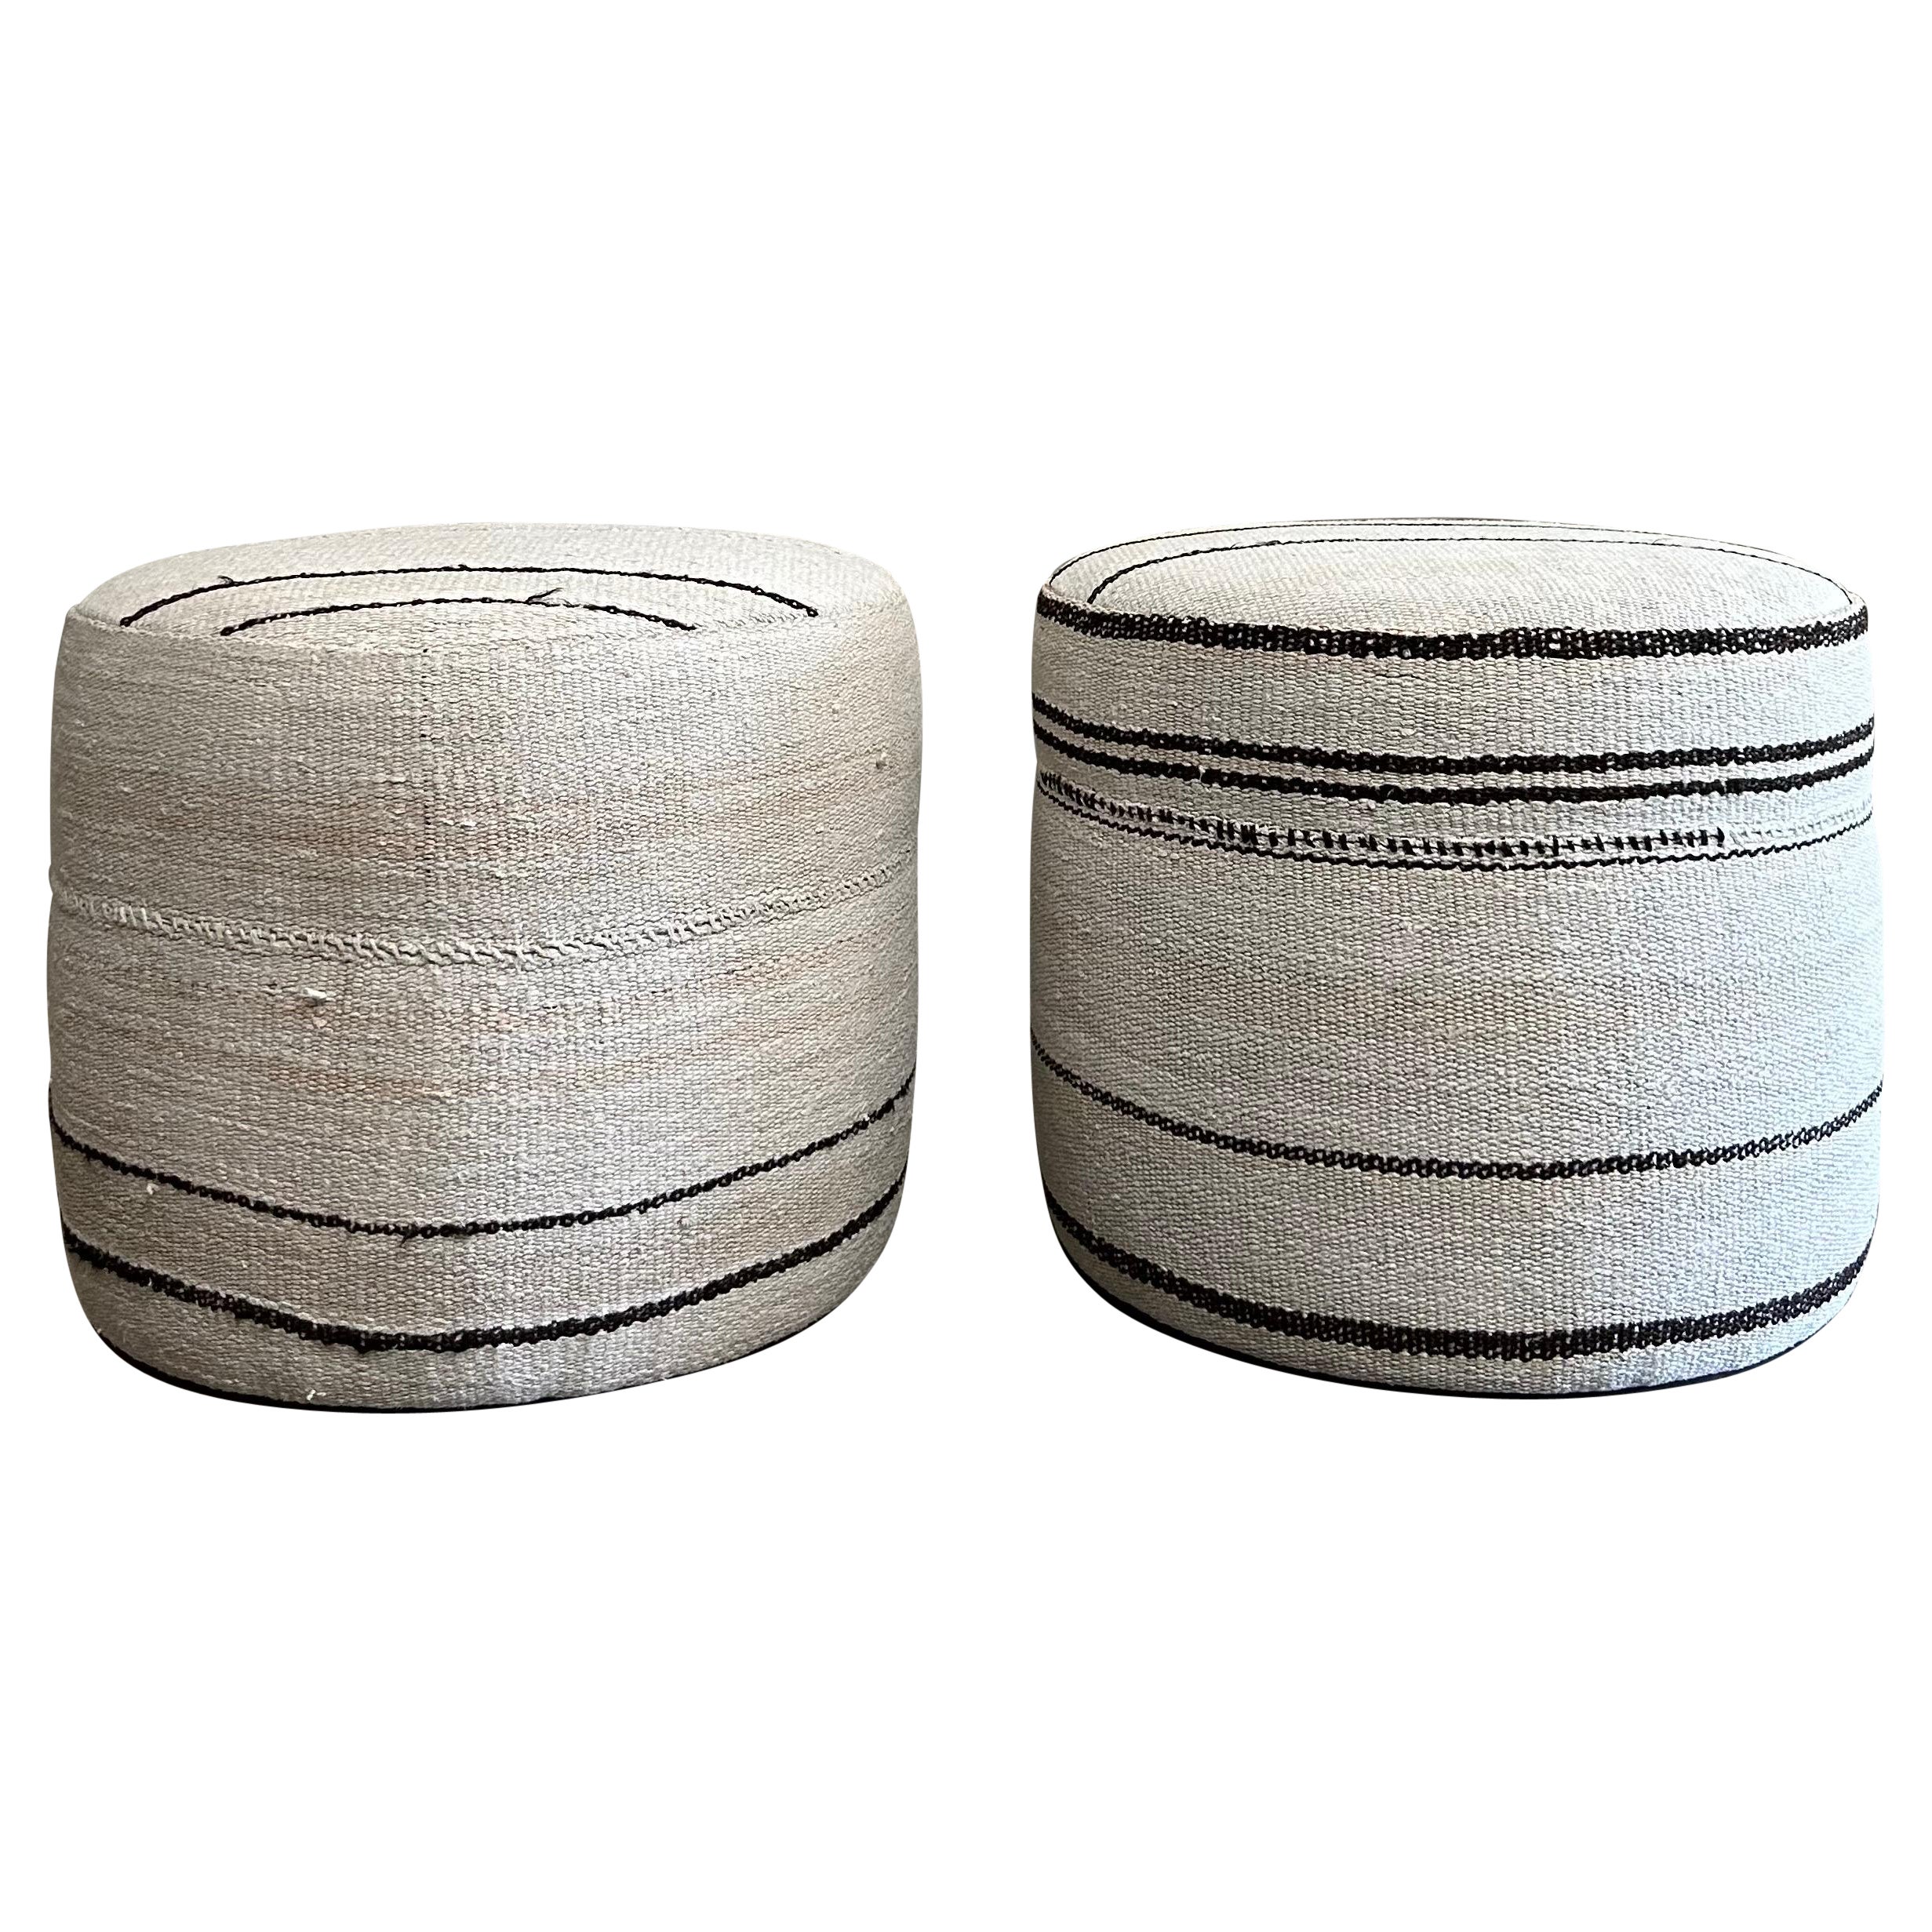 Custom Made Round Turkish Wool Pair of Ottomans with Stripes